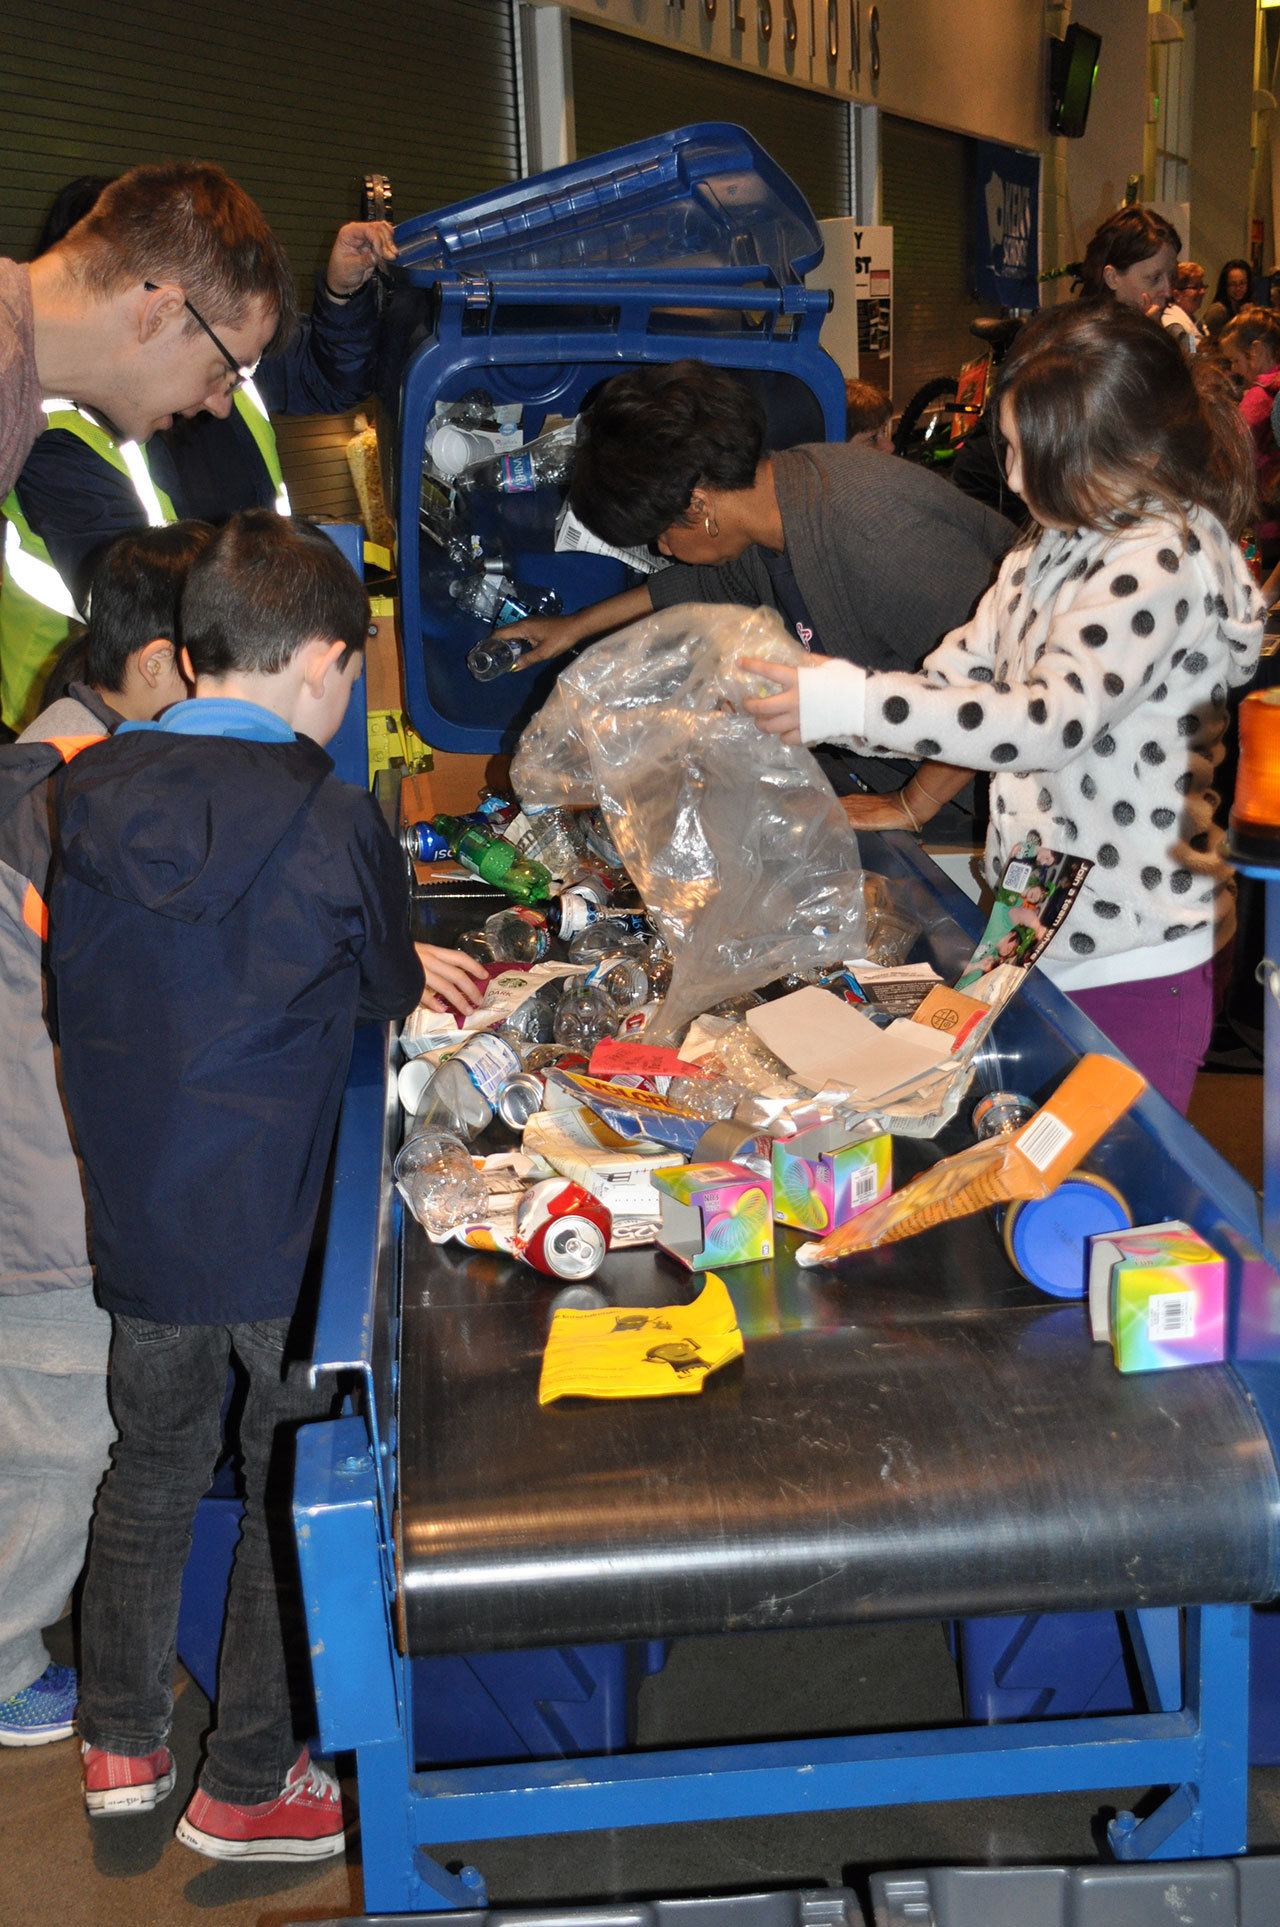 Children sort recyclable items from garbage at the Republic Services booth during the You Me We festival last Friday at Kent’s ShoWare Center. HEIDI SANDERS, Kent Reporter